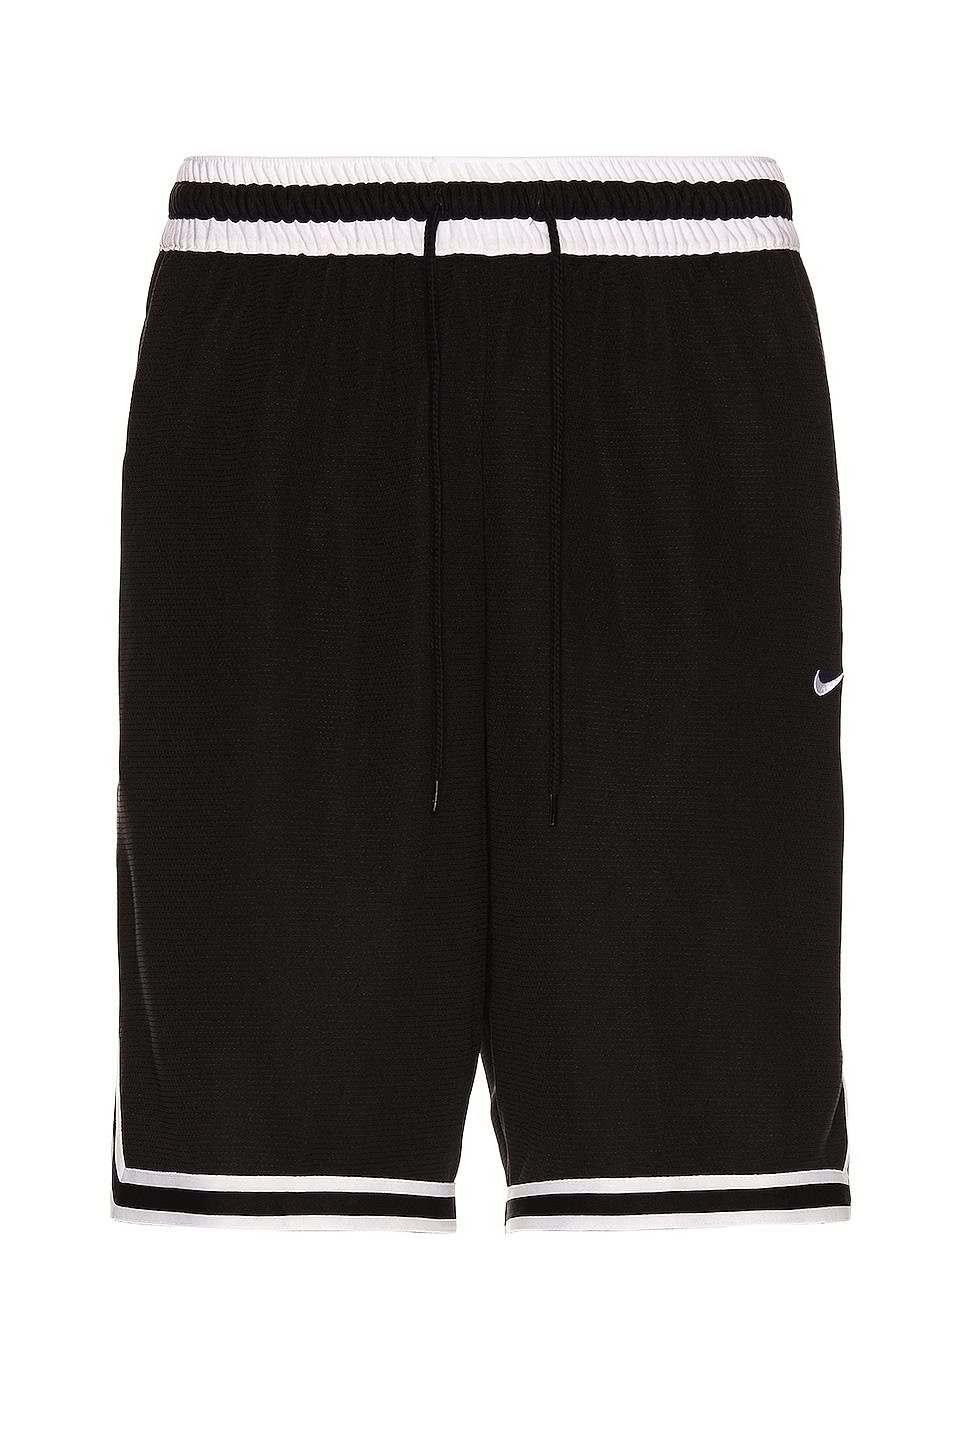 Nike DNA Shorts in Black by NIKE